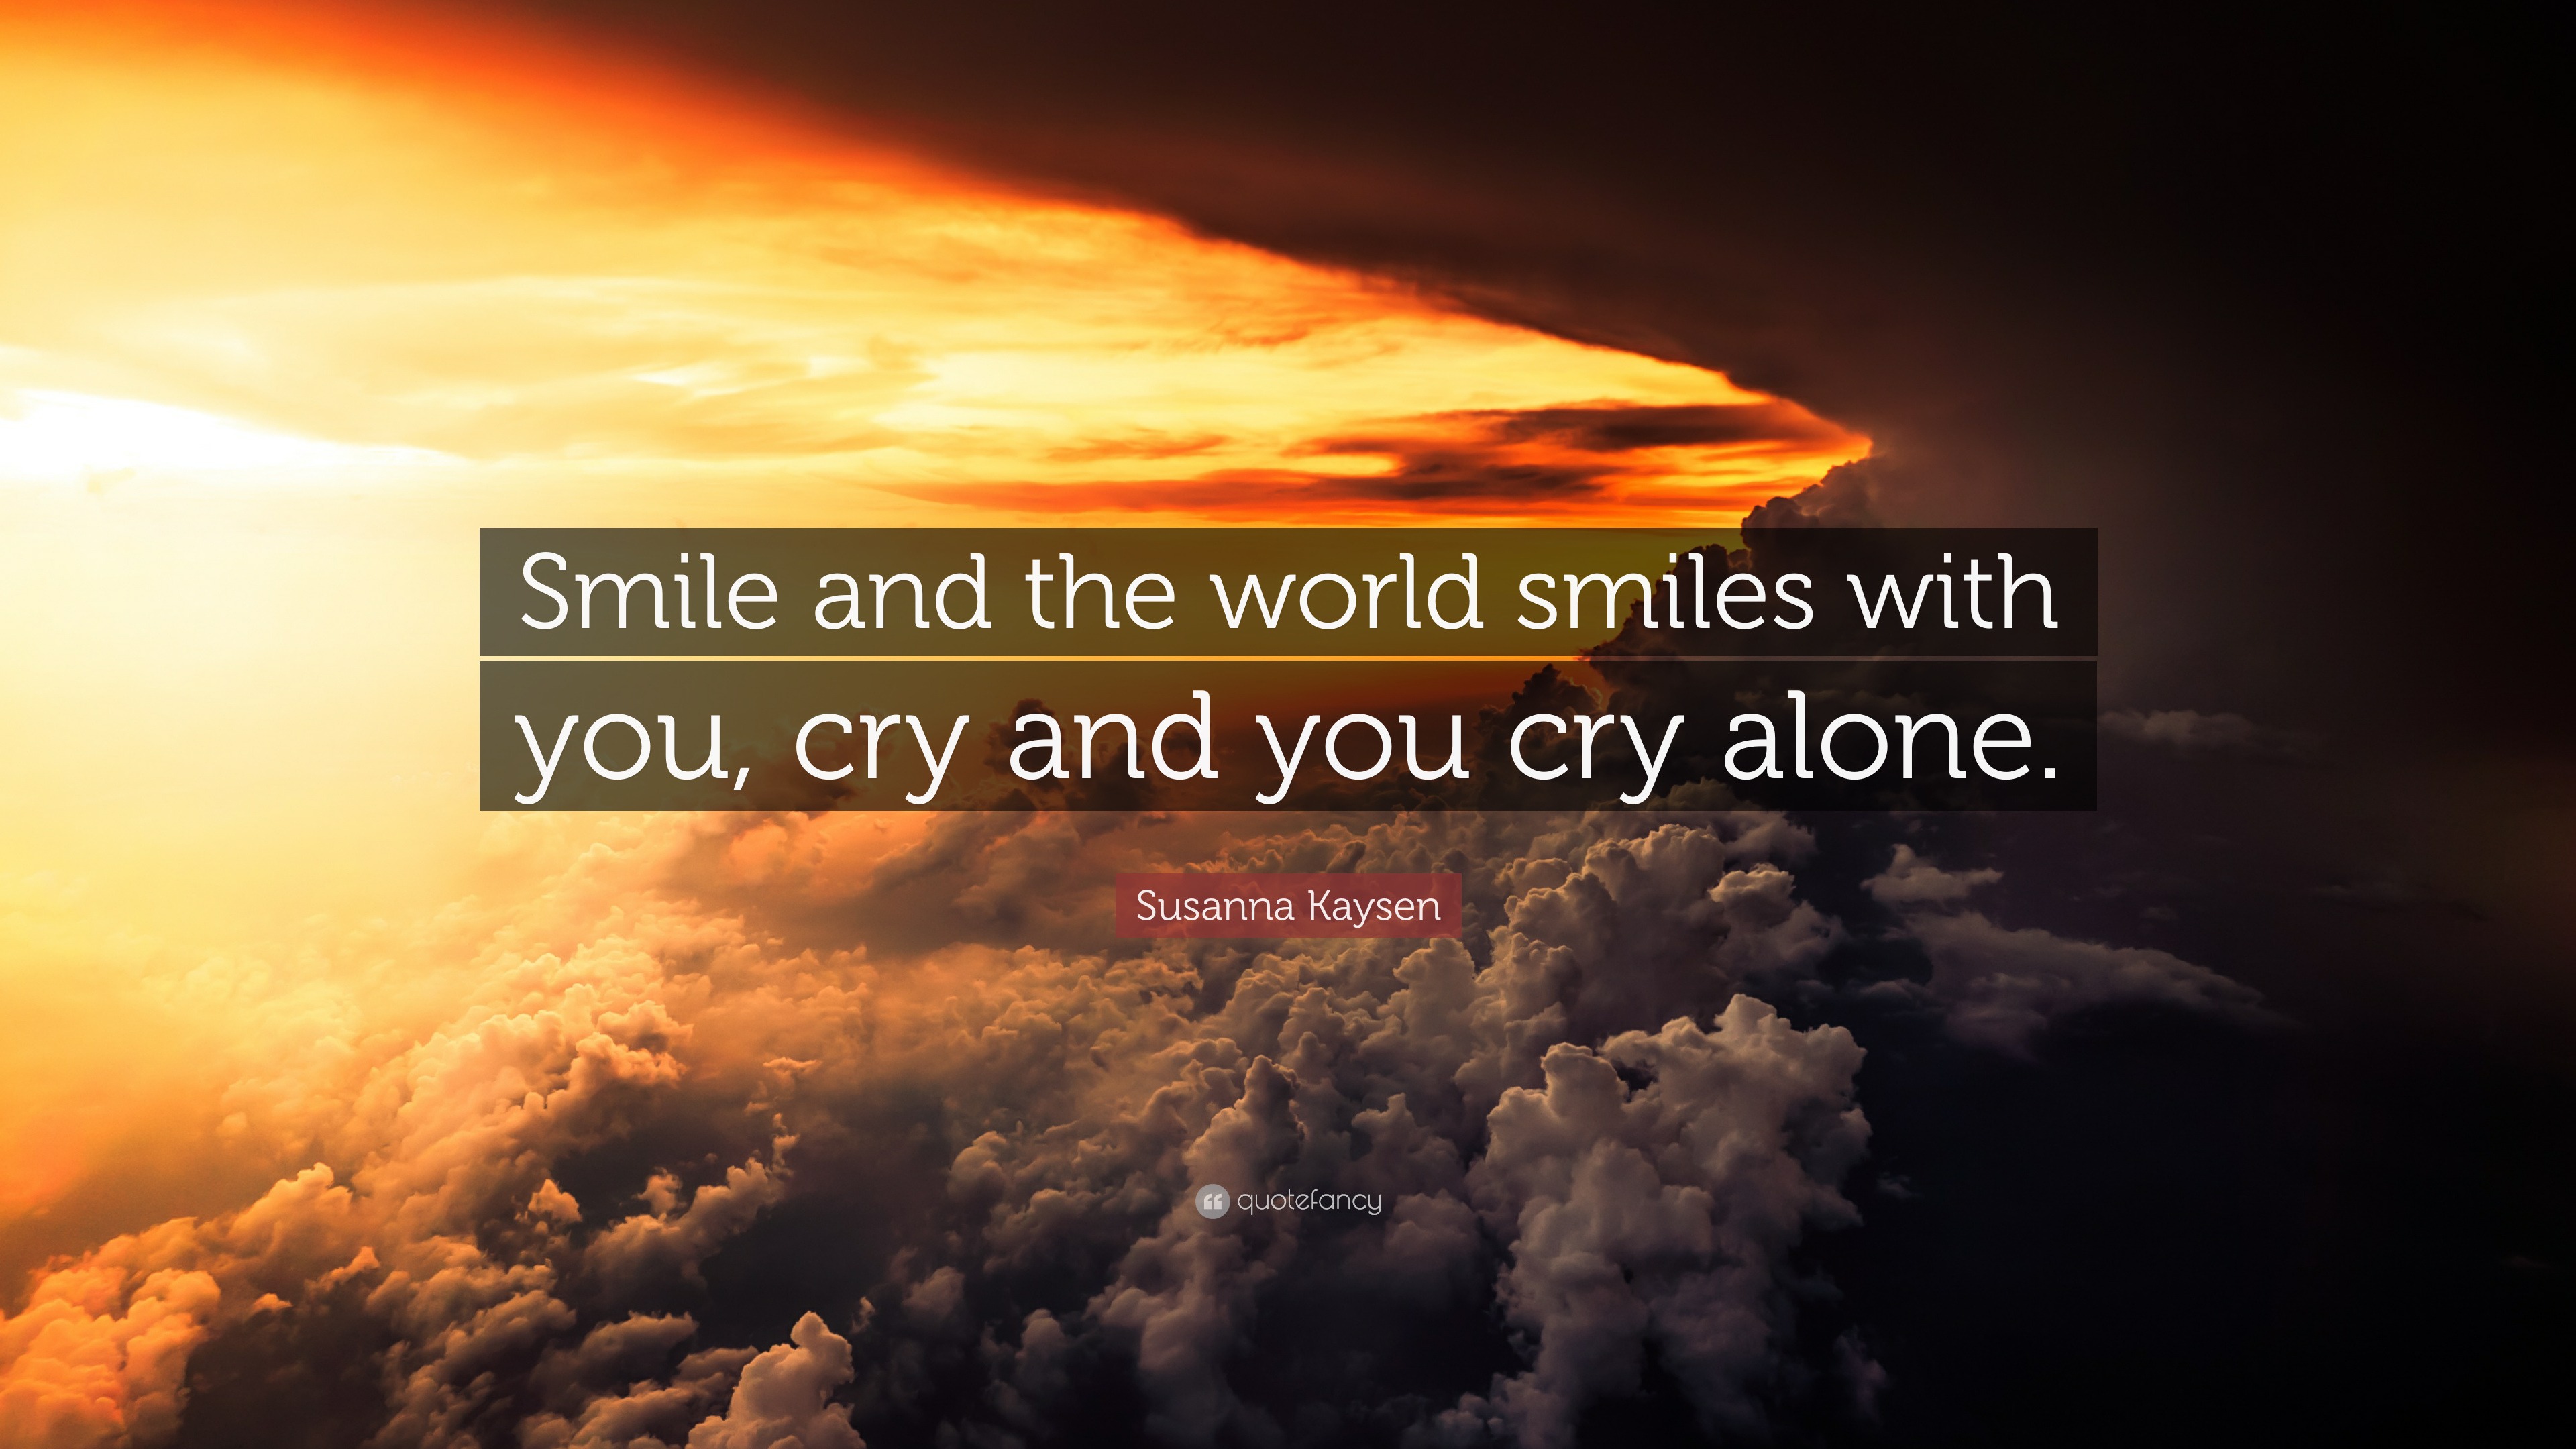 Susanna Kaysen Quote Smile And The World Smiles With You Cry And You Cry Alone